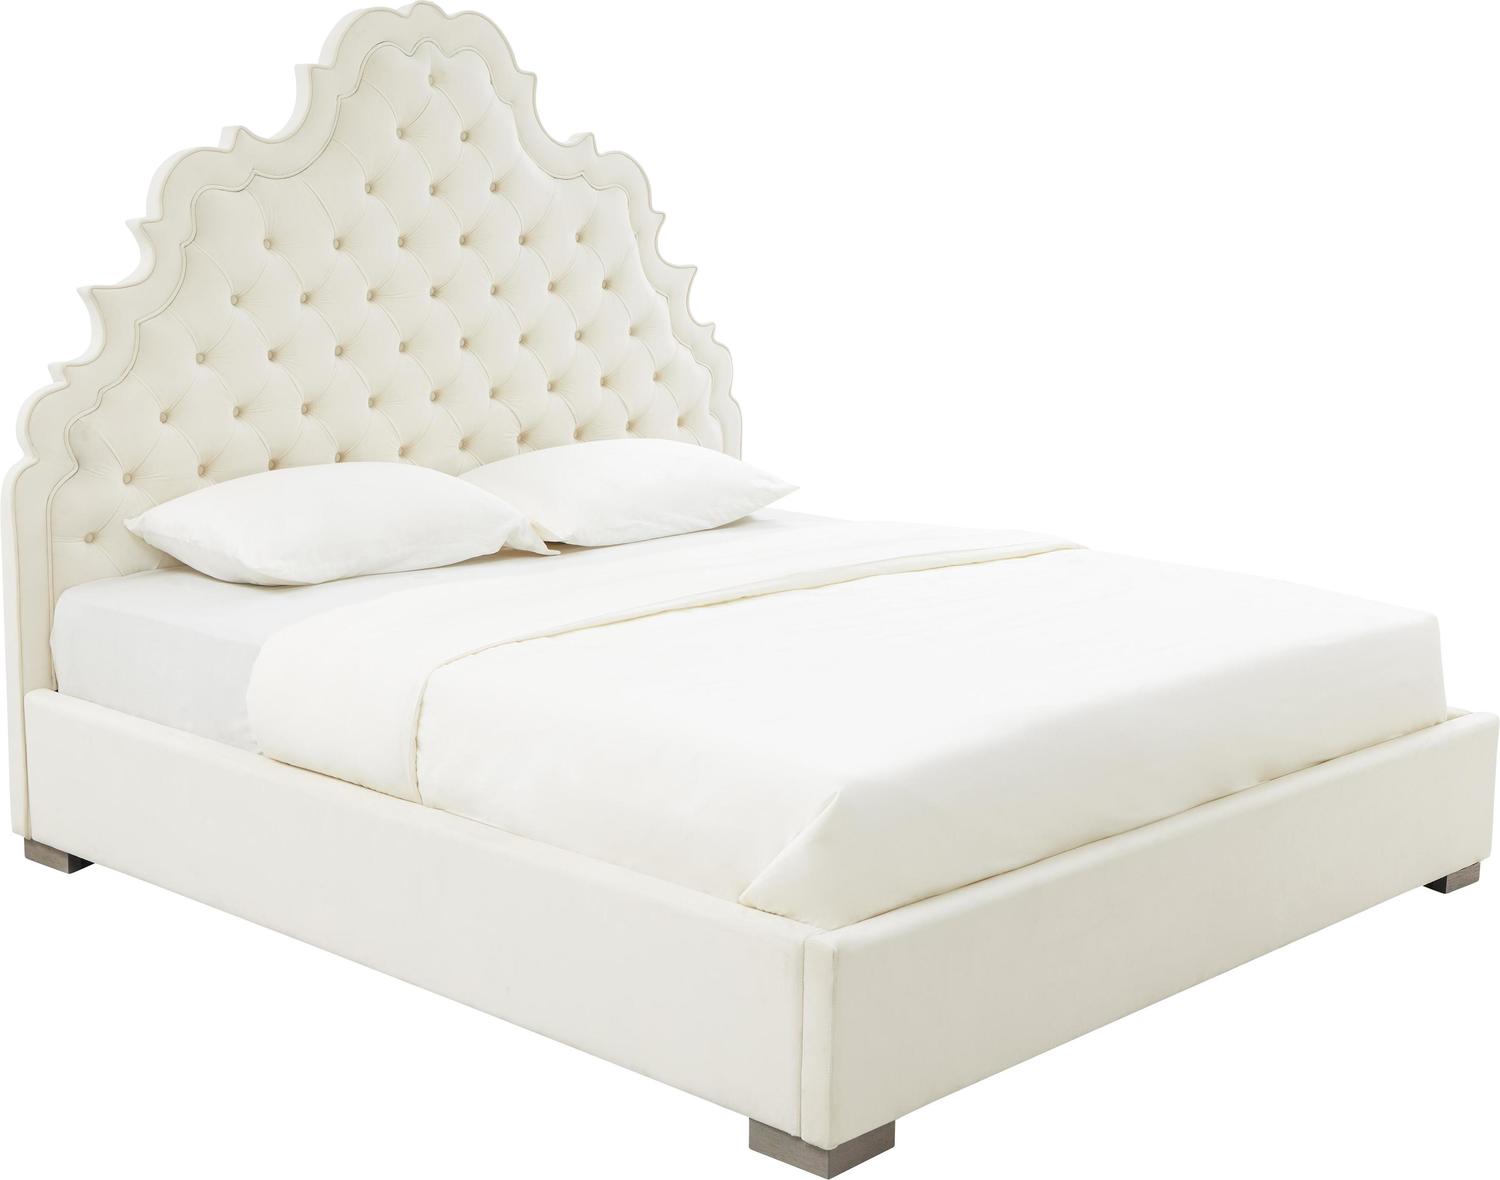 king bed and frame Contemporary Design Furniture Beds Beds Cream